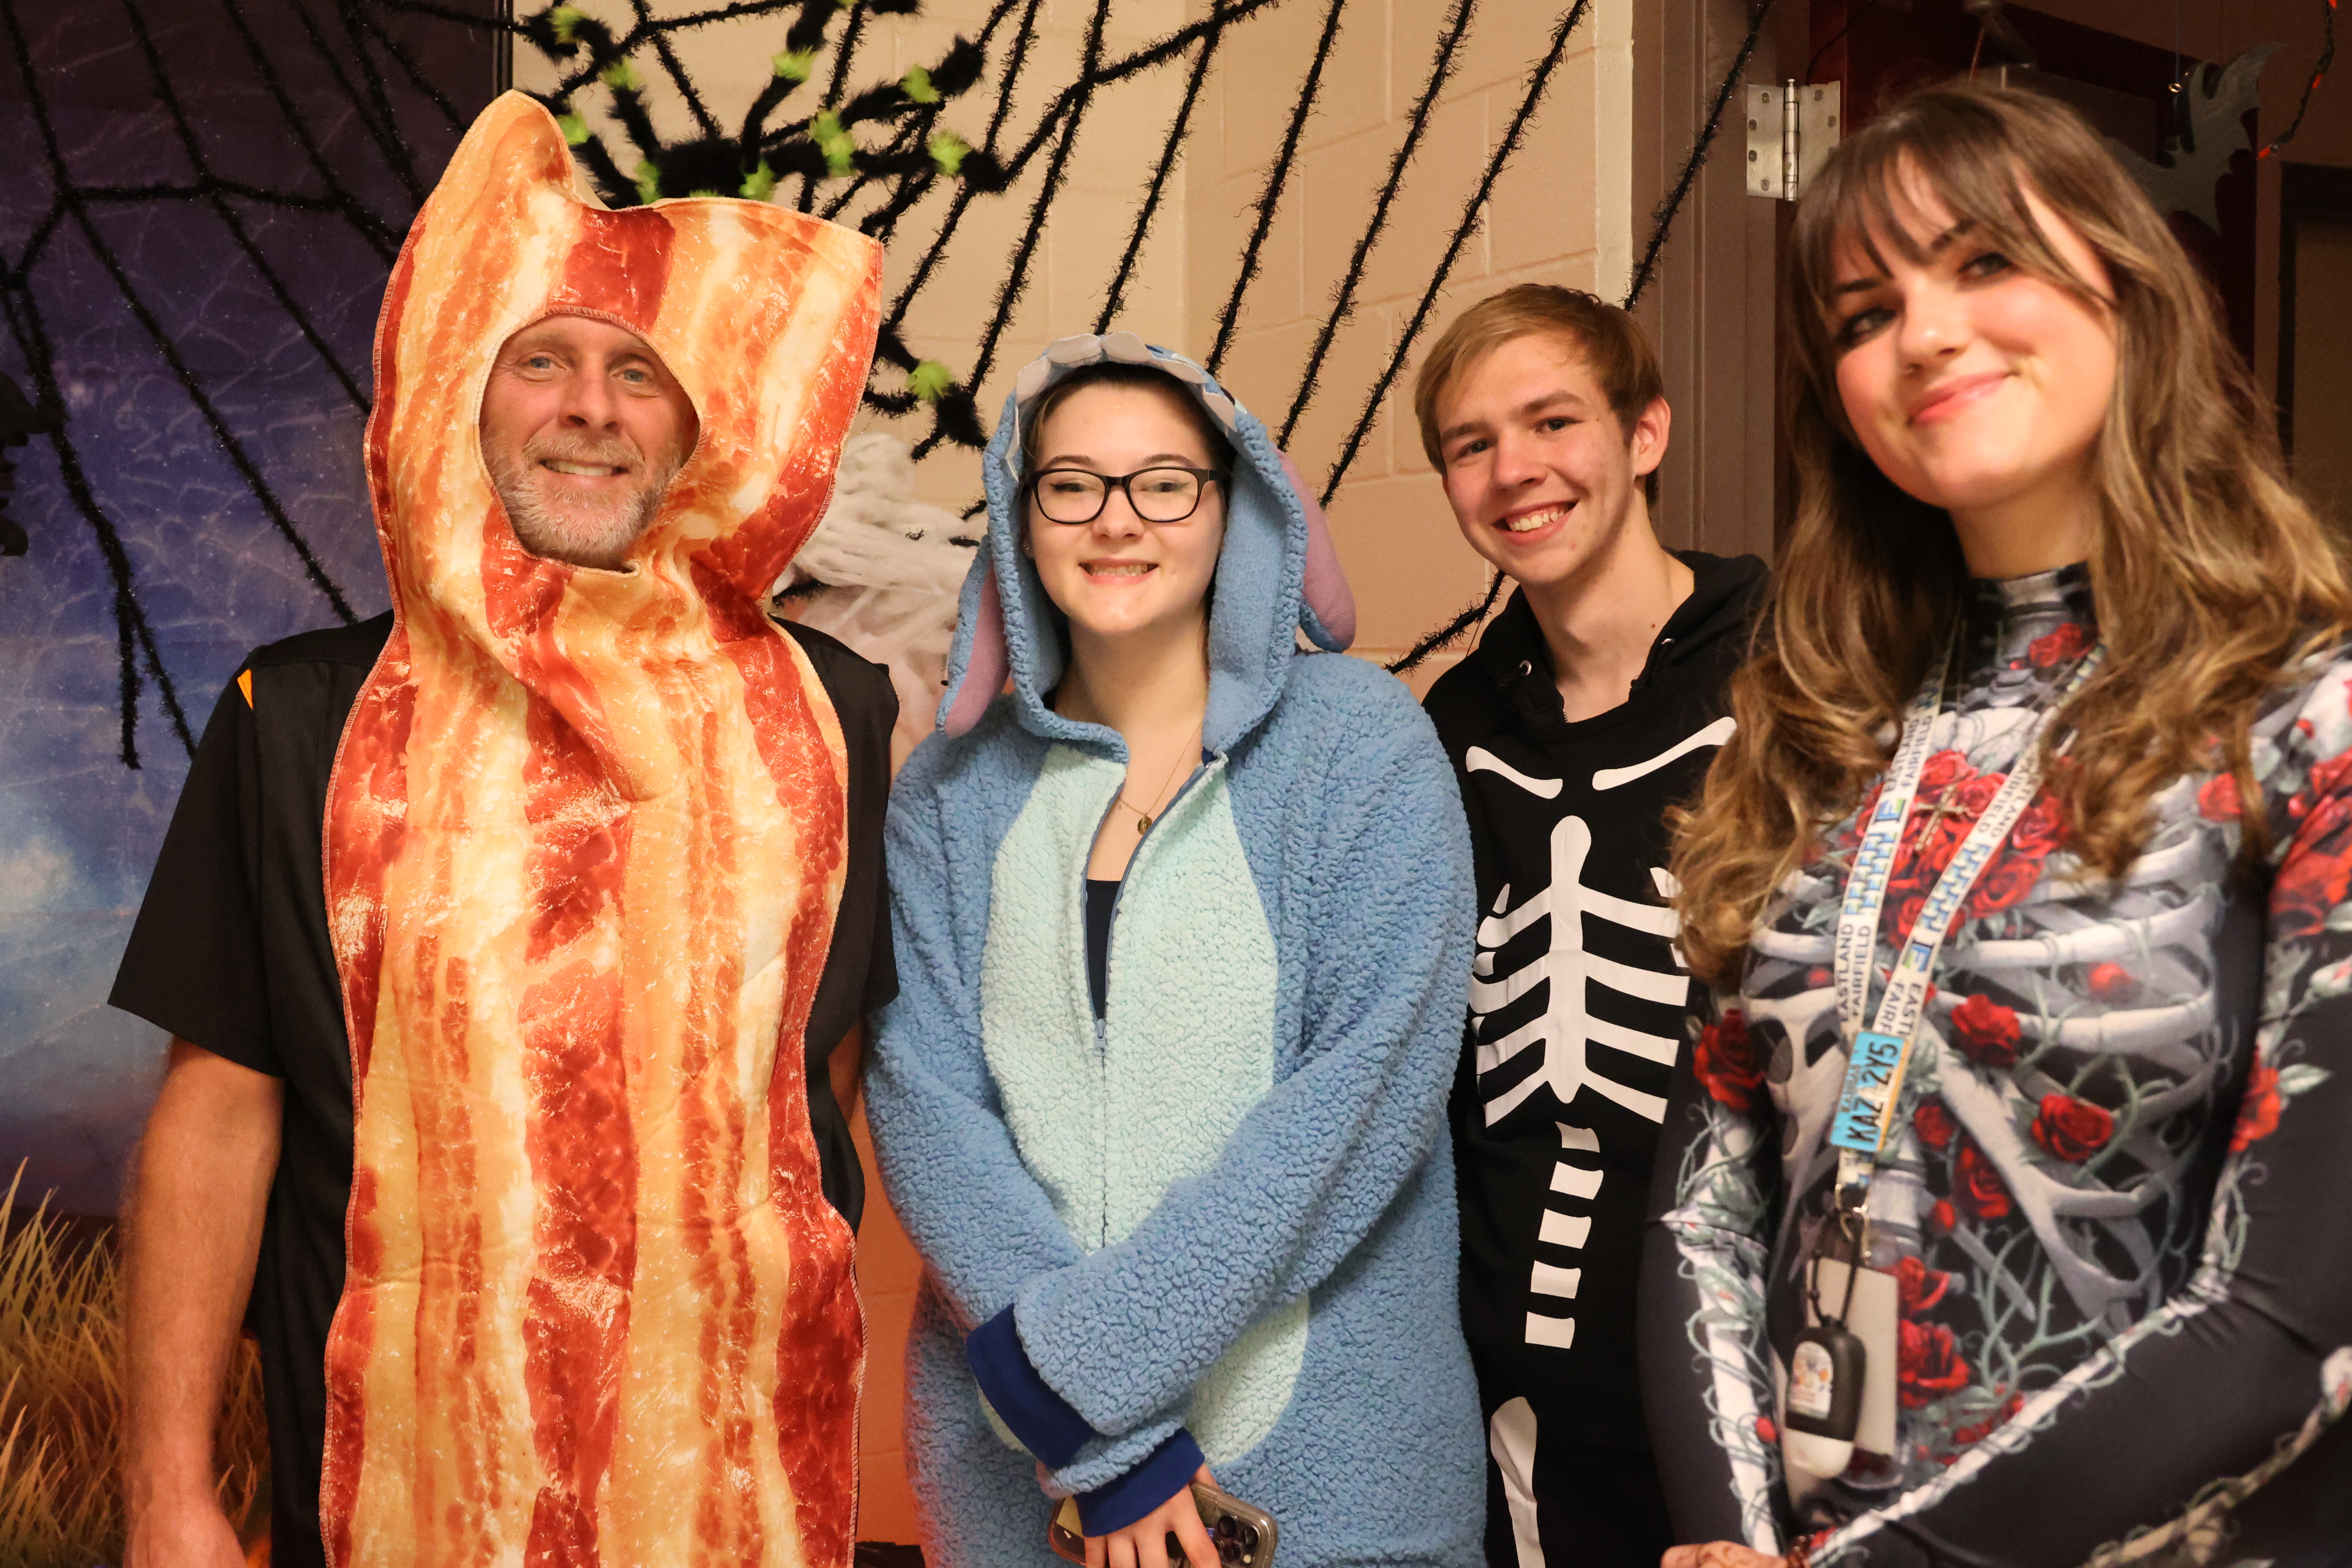 Construction instructor dressed as a piece of bacon stands with a few graduates that came back in costume.